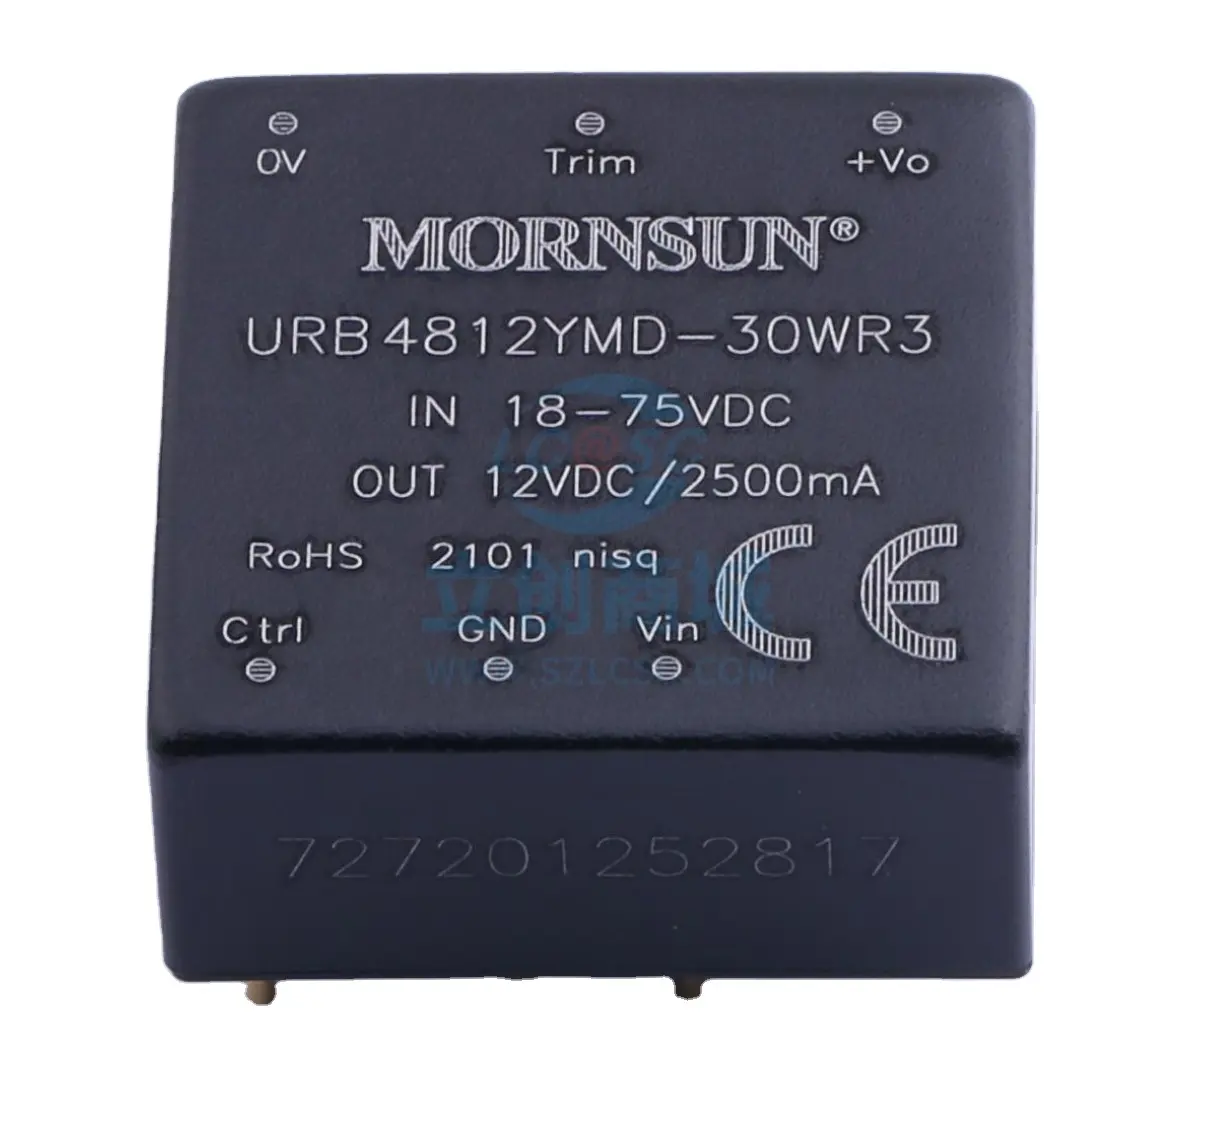 Mornsun 30W isolated DC-DC converter in 1x1 inch Ultra-wide input and regulated single output URB4812YMD-30WR3